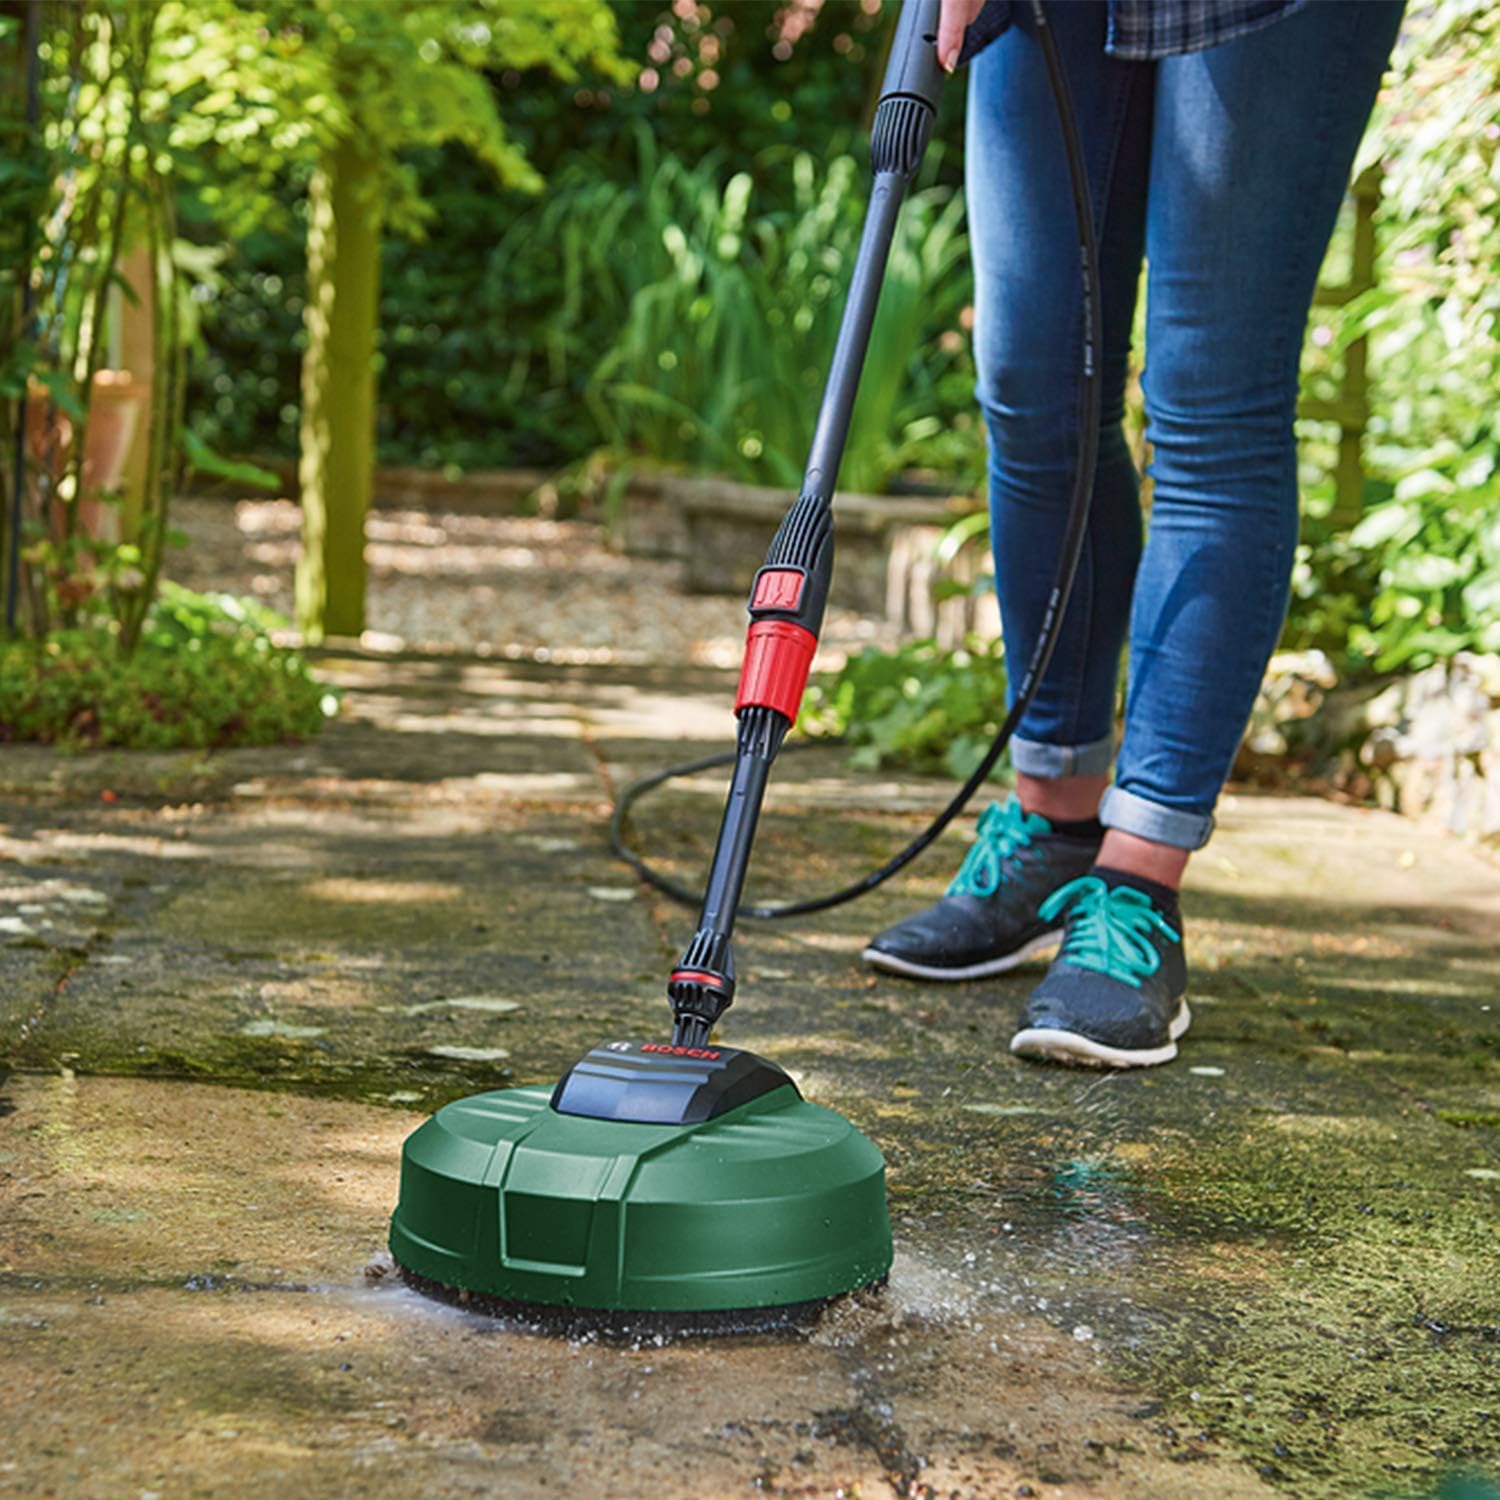 Bosch Home and Garden High Pressure Washer EasyAquatak 120 (1500W, Home and Car Kit Included, Max. Flow Rate: 350l/h, in Cardboard Box) - Amazon Exclusive, Green, 37.5 cm*40.0 cm*20.0 cm